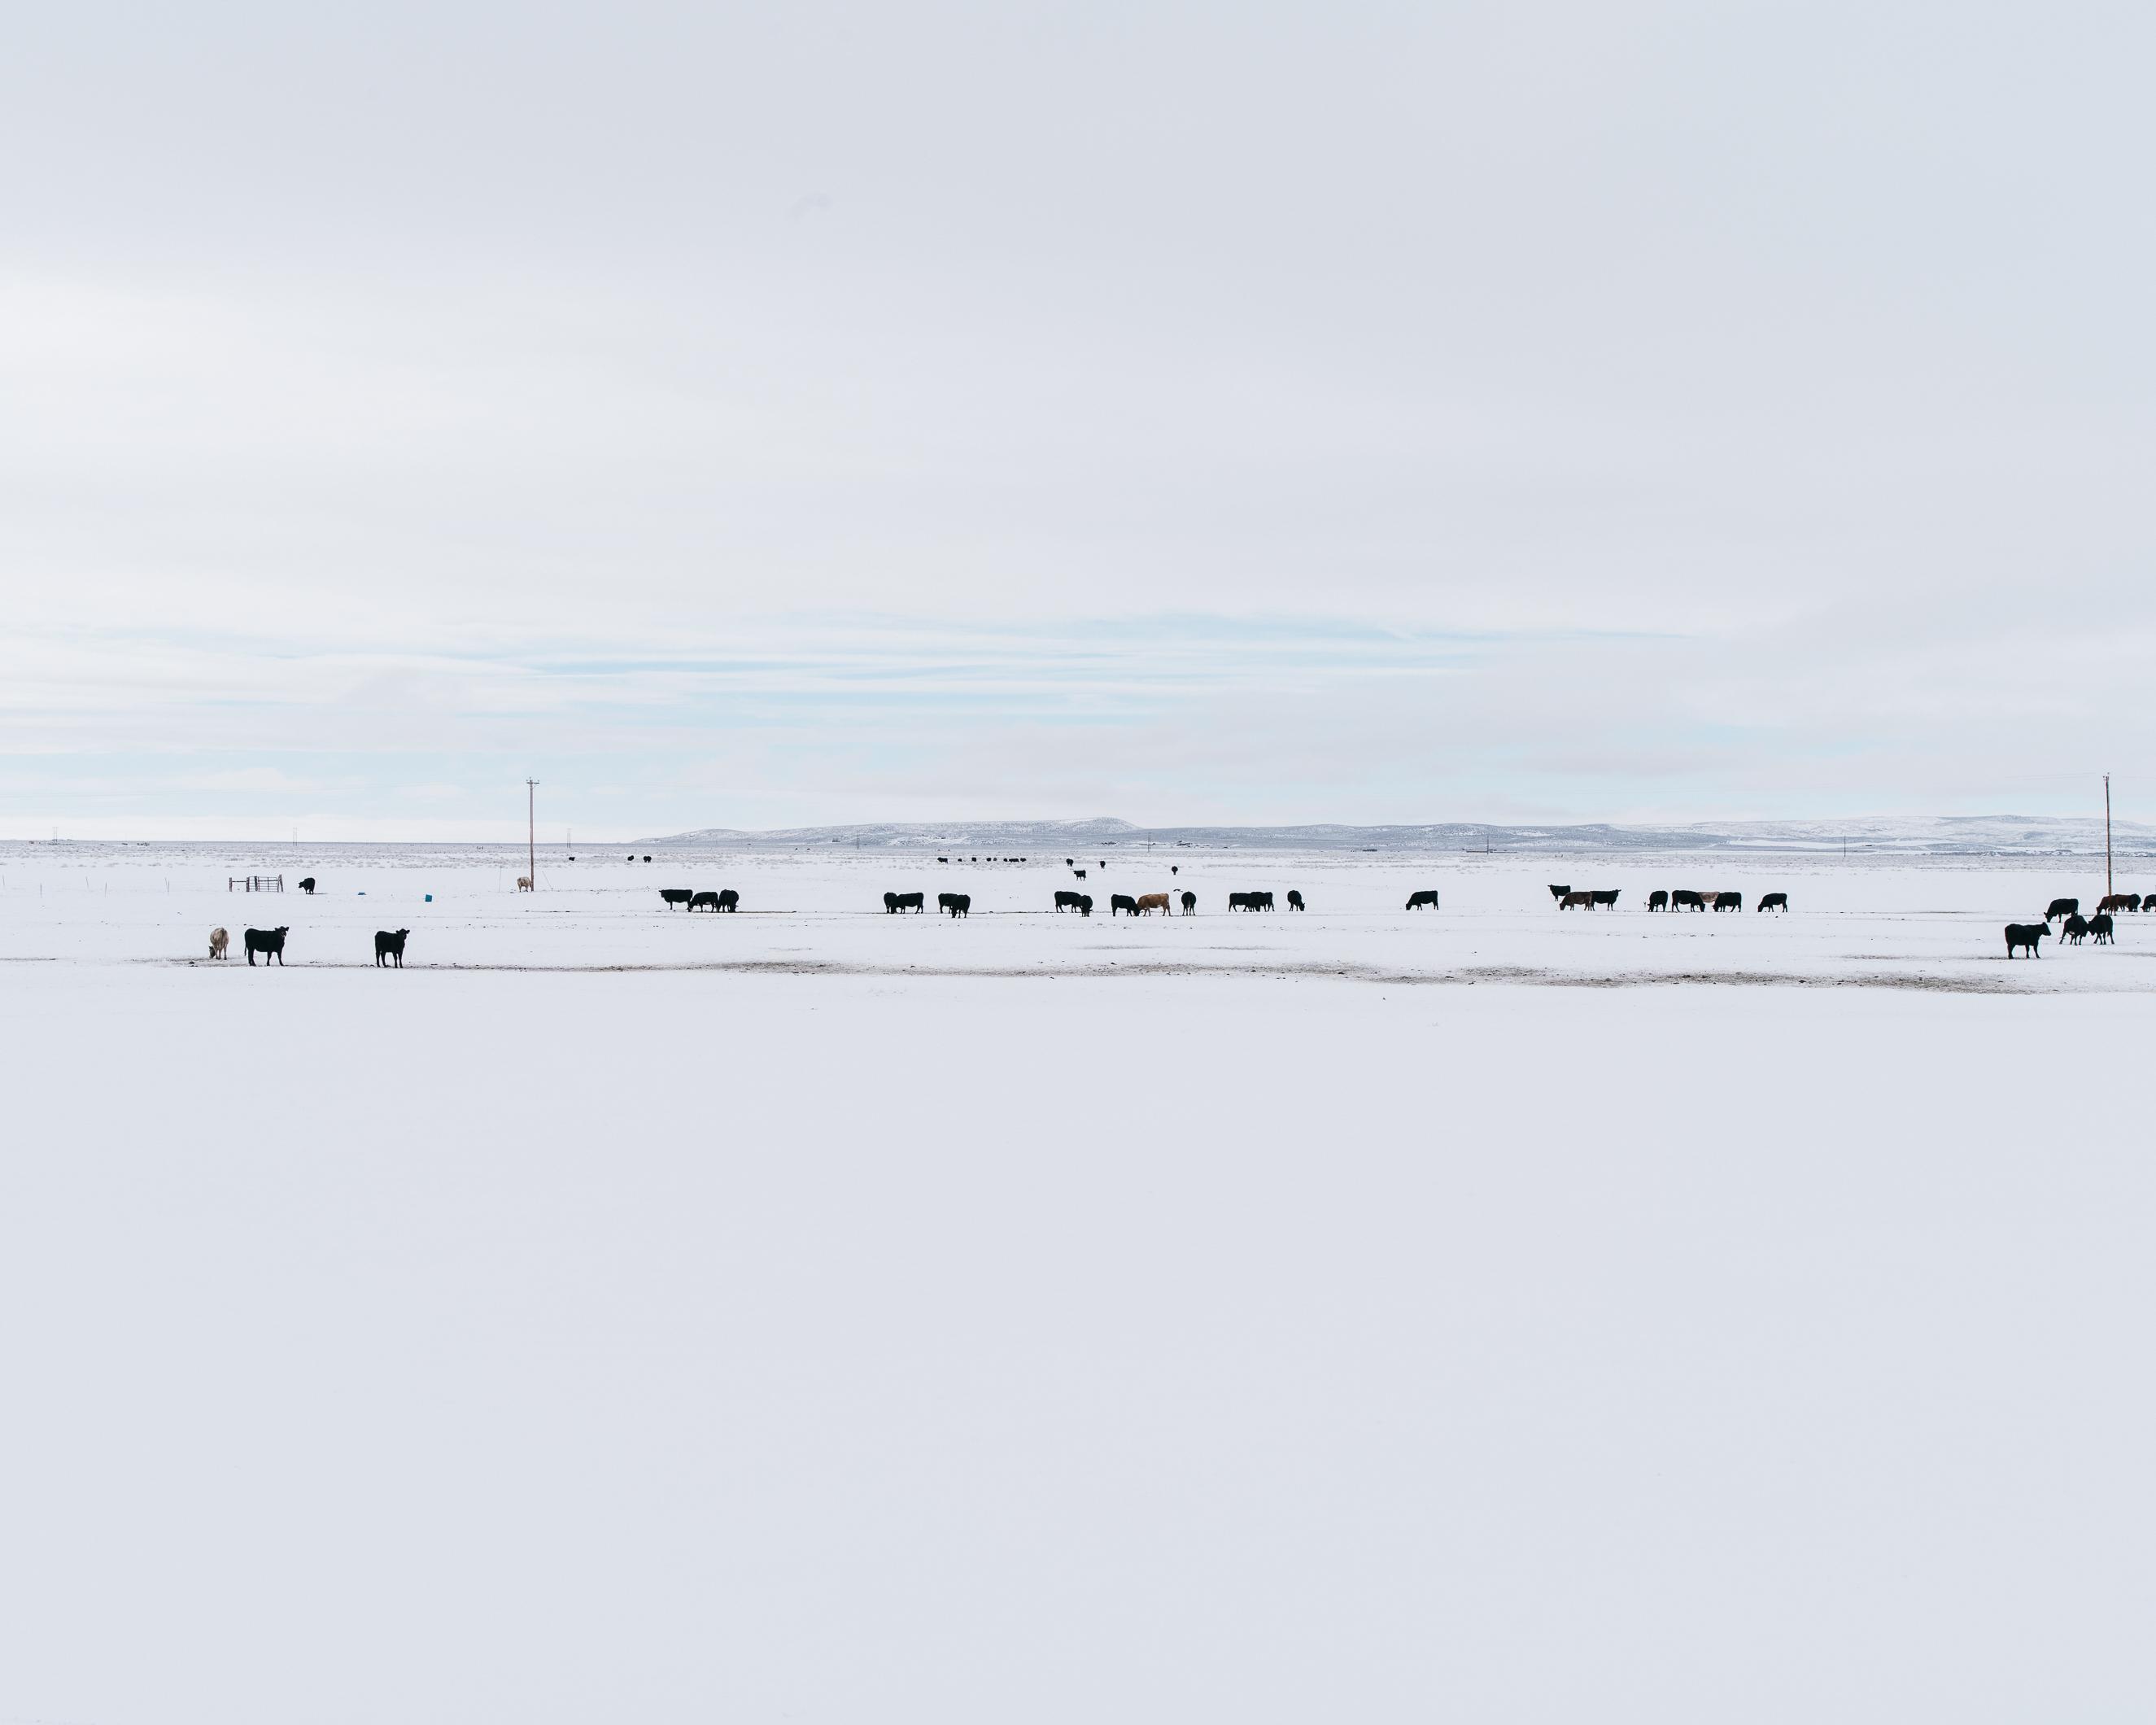 Cattle graze on private land off the road between Burns, Ore., and the Malheur National Wildlife Refuge, on Jan. 11, 2016